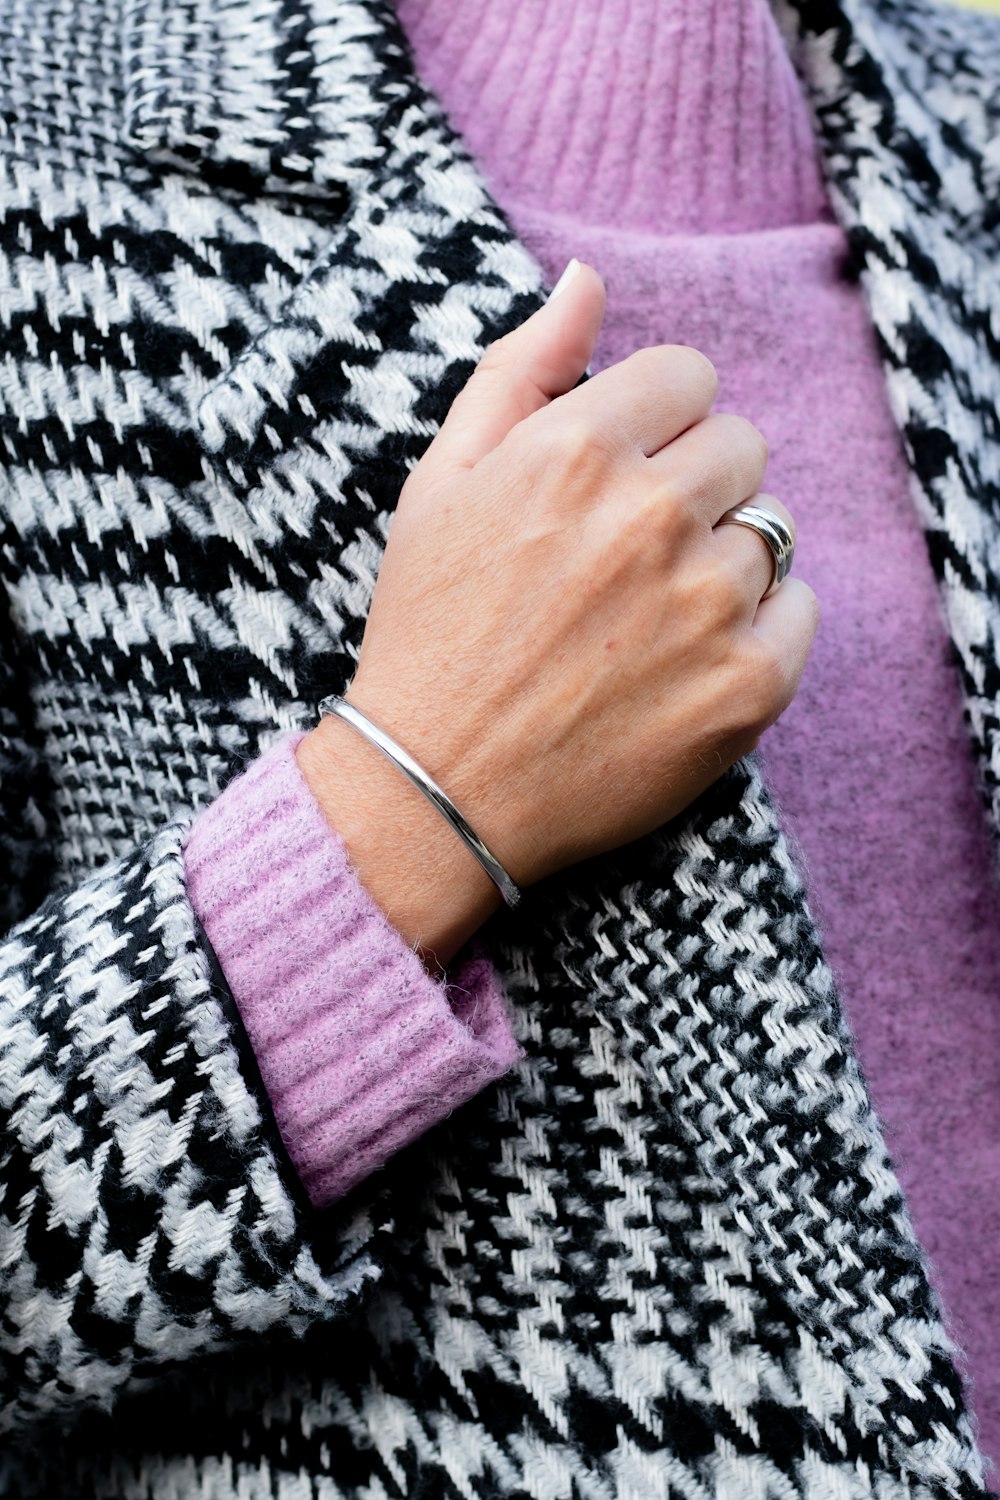 a person's hand on a purple and white striped shirt